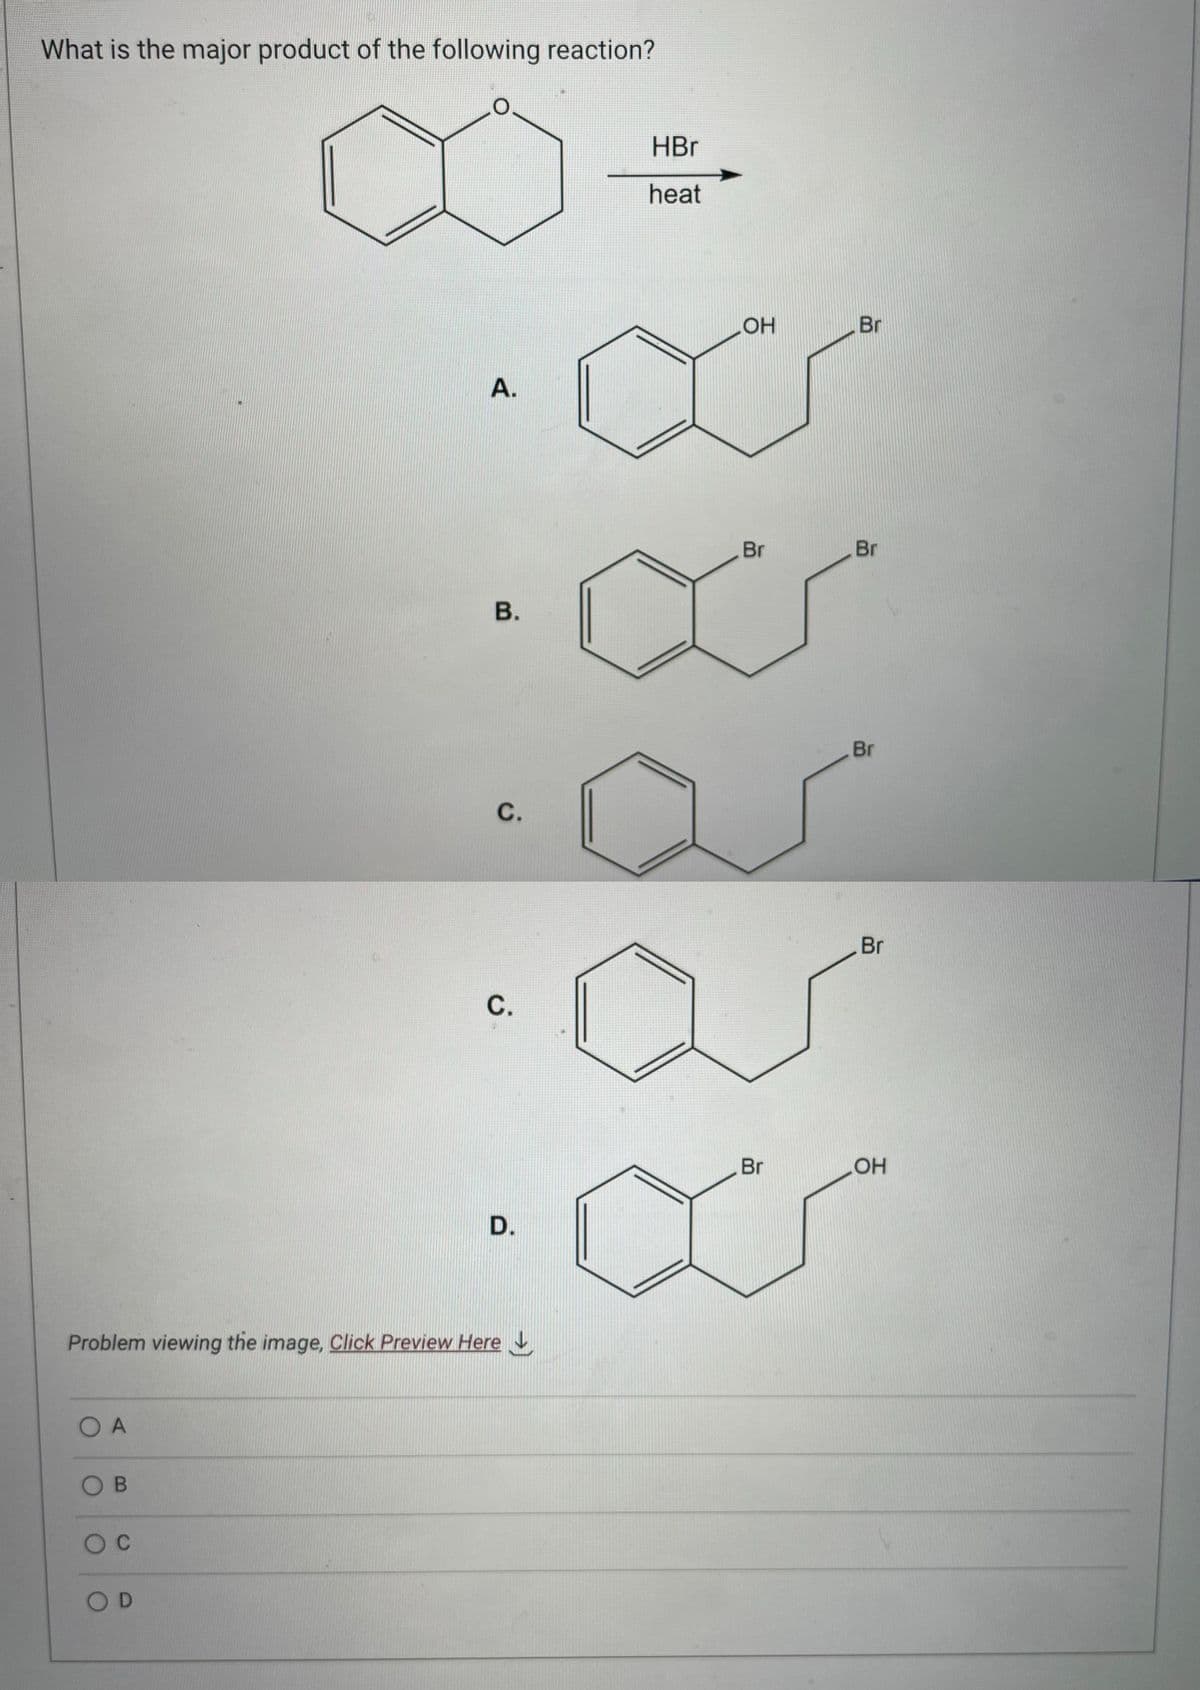 What is the major product of the following reaction?
OA
OB
O C
A.
OD
B.
Problem viewing the image. Click Preview Here
C.
C.
D.
HBr
heat
OH
Br
Br
Br
Br
Br
Br
OH